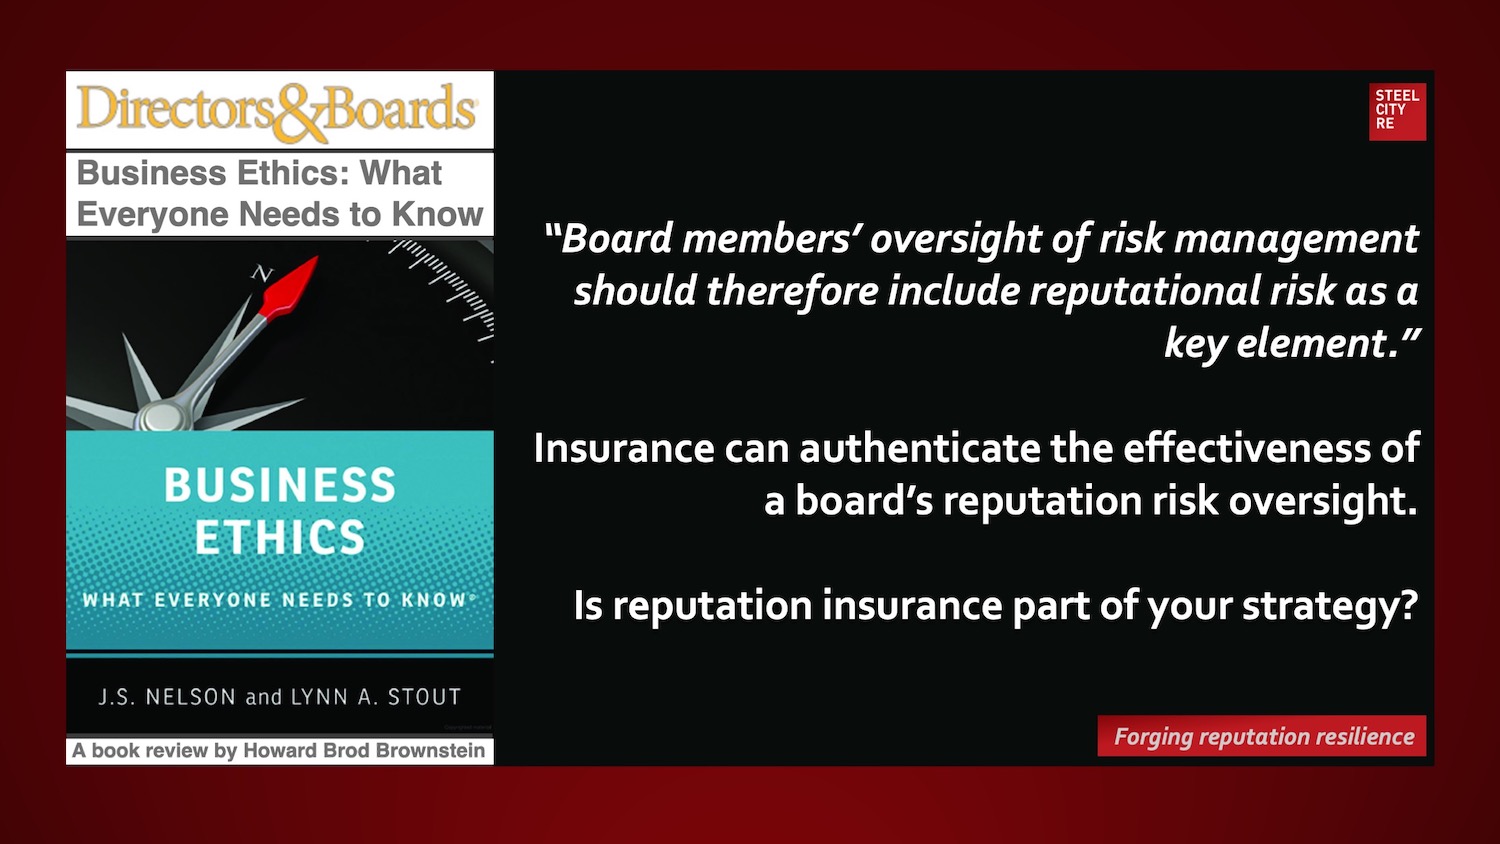 Oversight of Ethics Risk Management. Insurance can authenticate the effectiveness of a board’s reputation risk oversight.